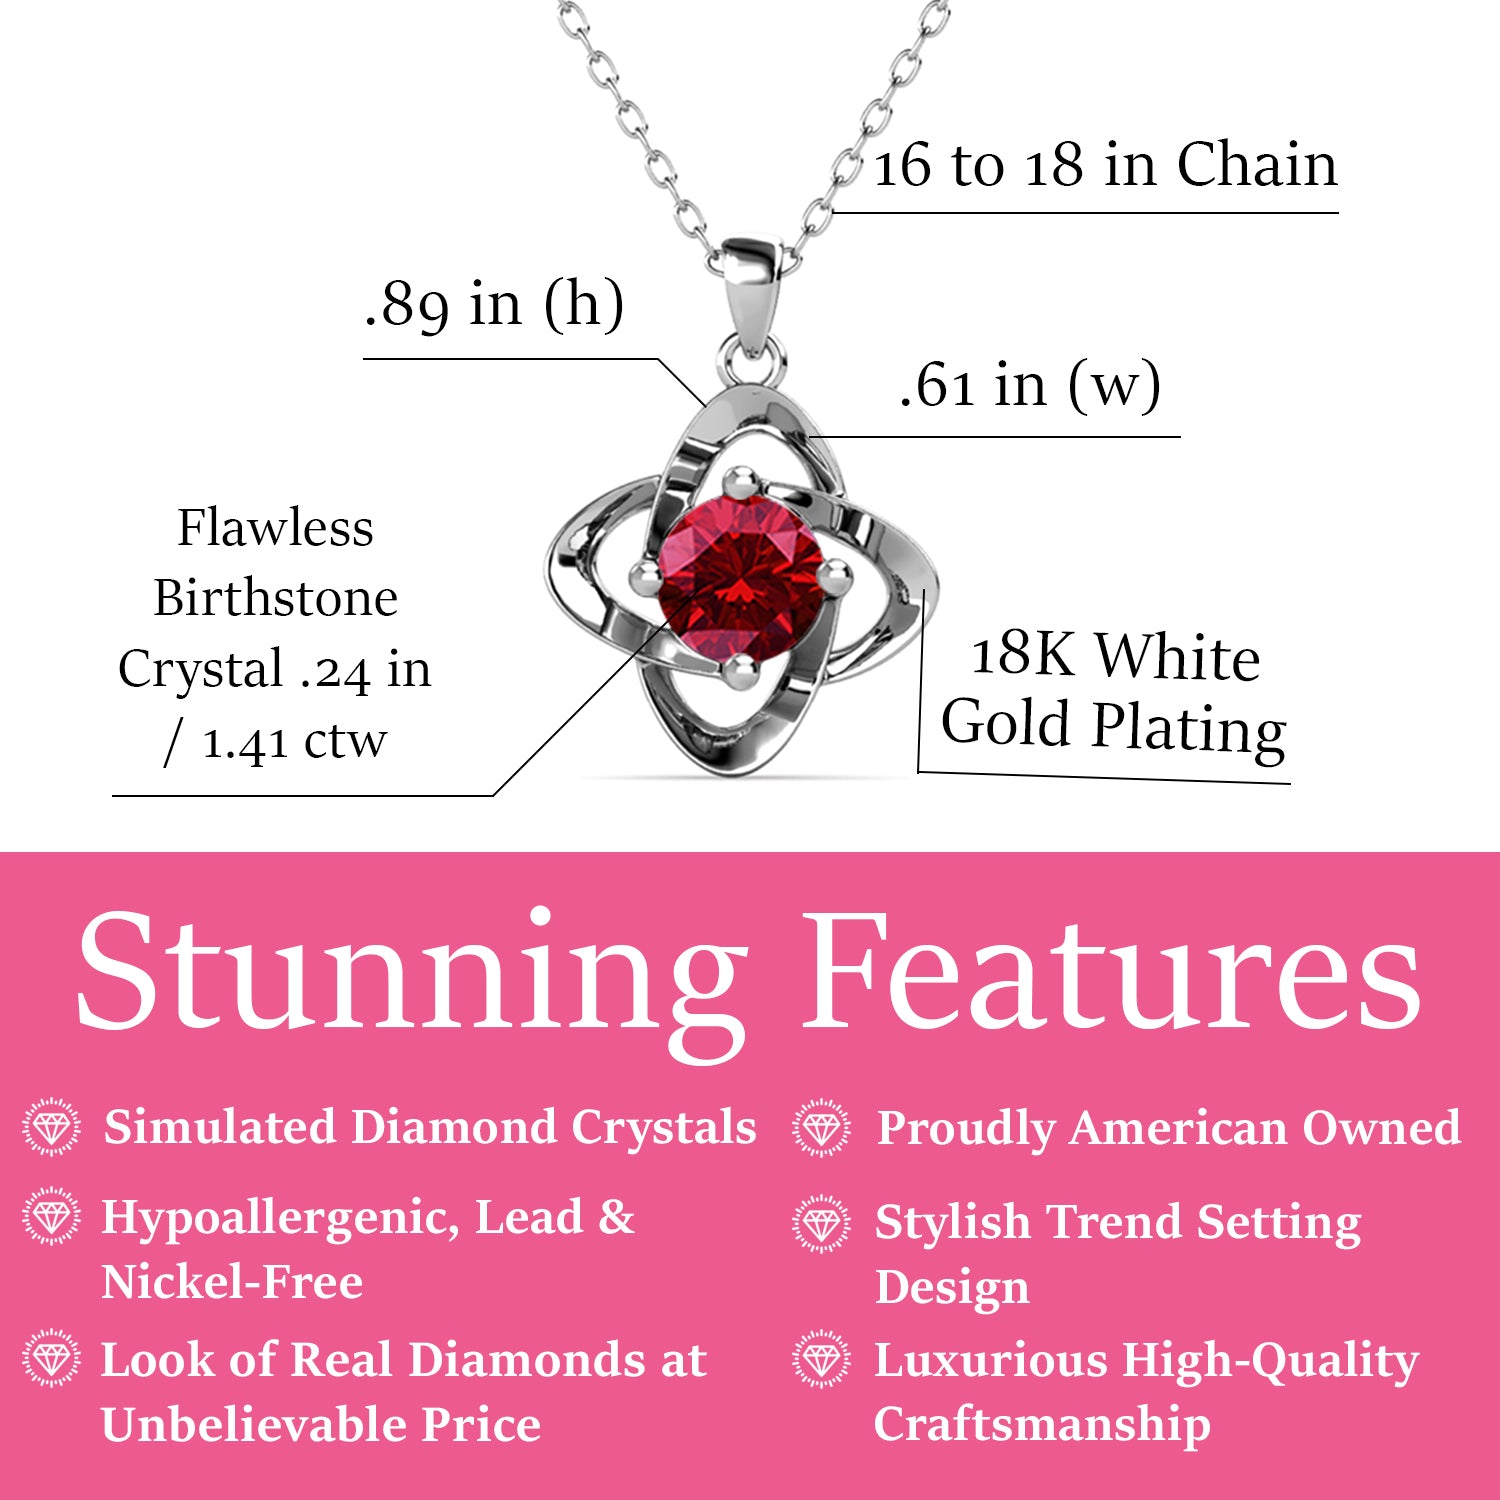 Infinity January Birthstone Garnet Necklace, 18k White Gold Plated Silver Birthstone Crystal Necklace